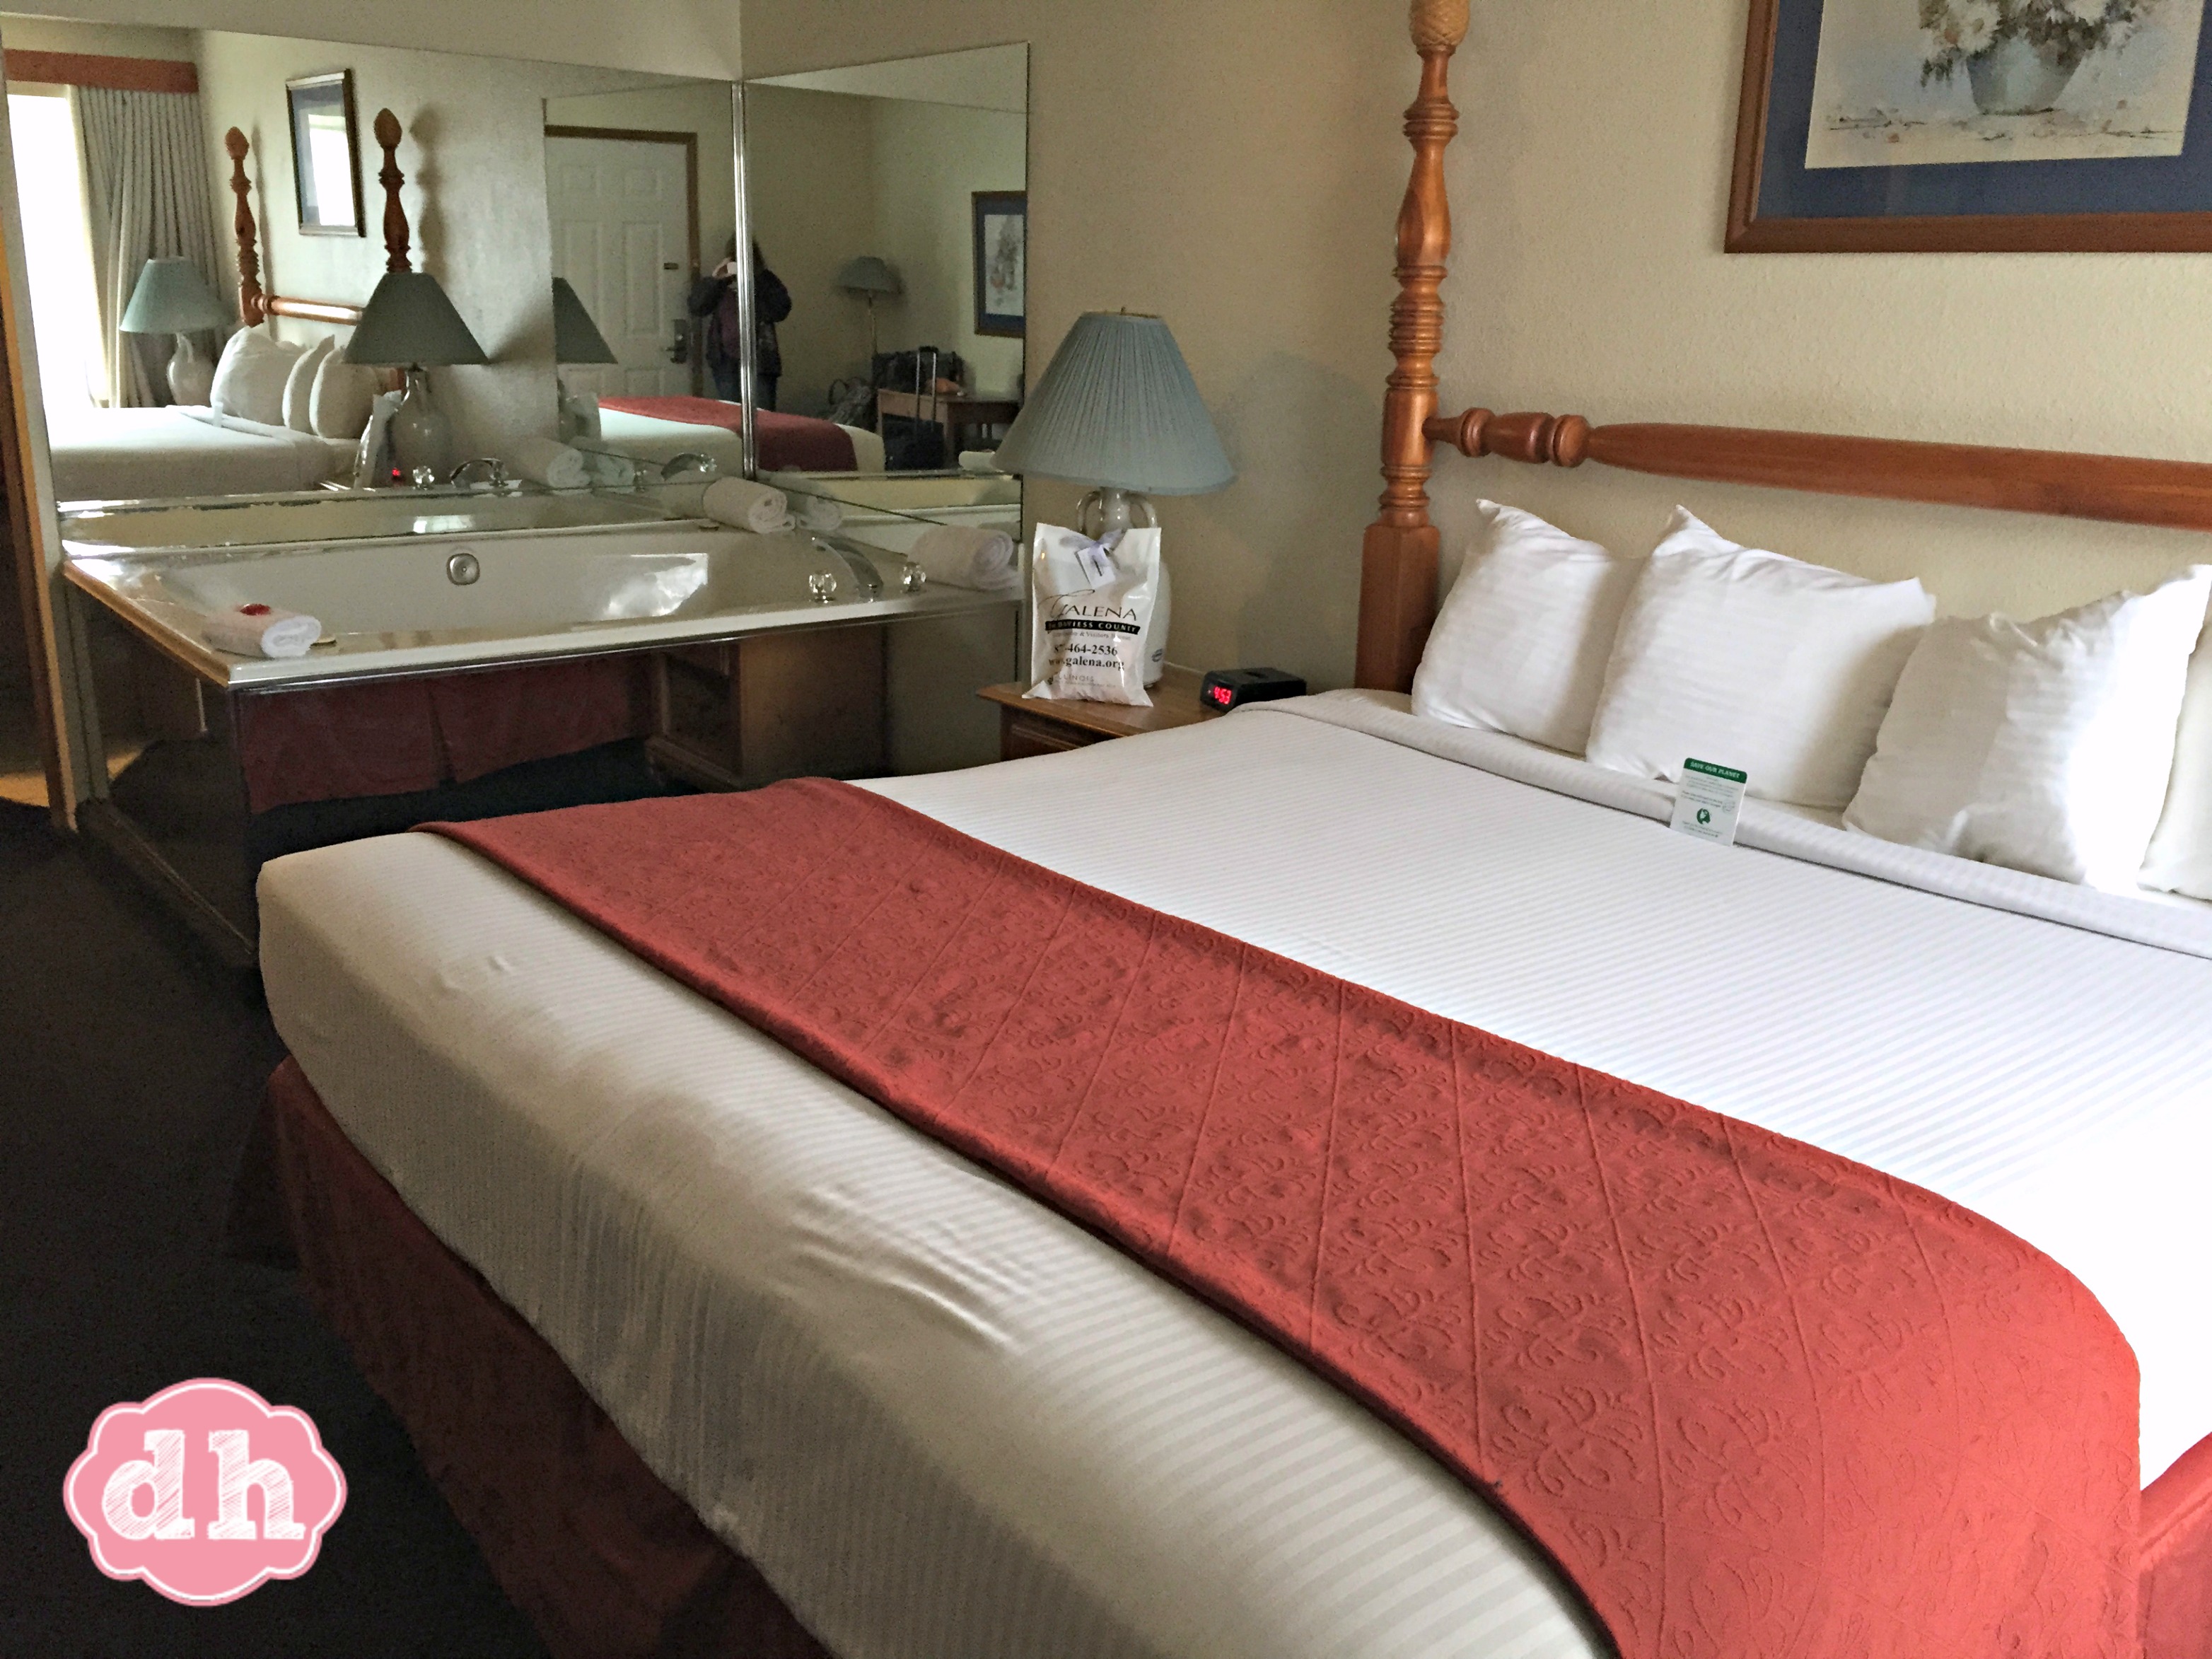 Relaxation at it's best! Best Western in Galena, IL #TravelGalena #EnjoyIllinois